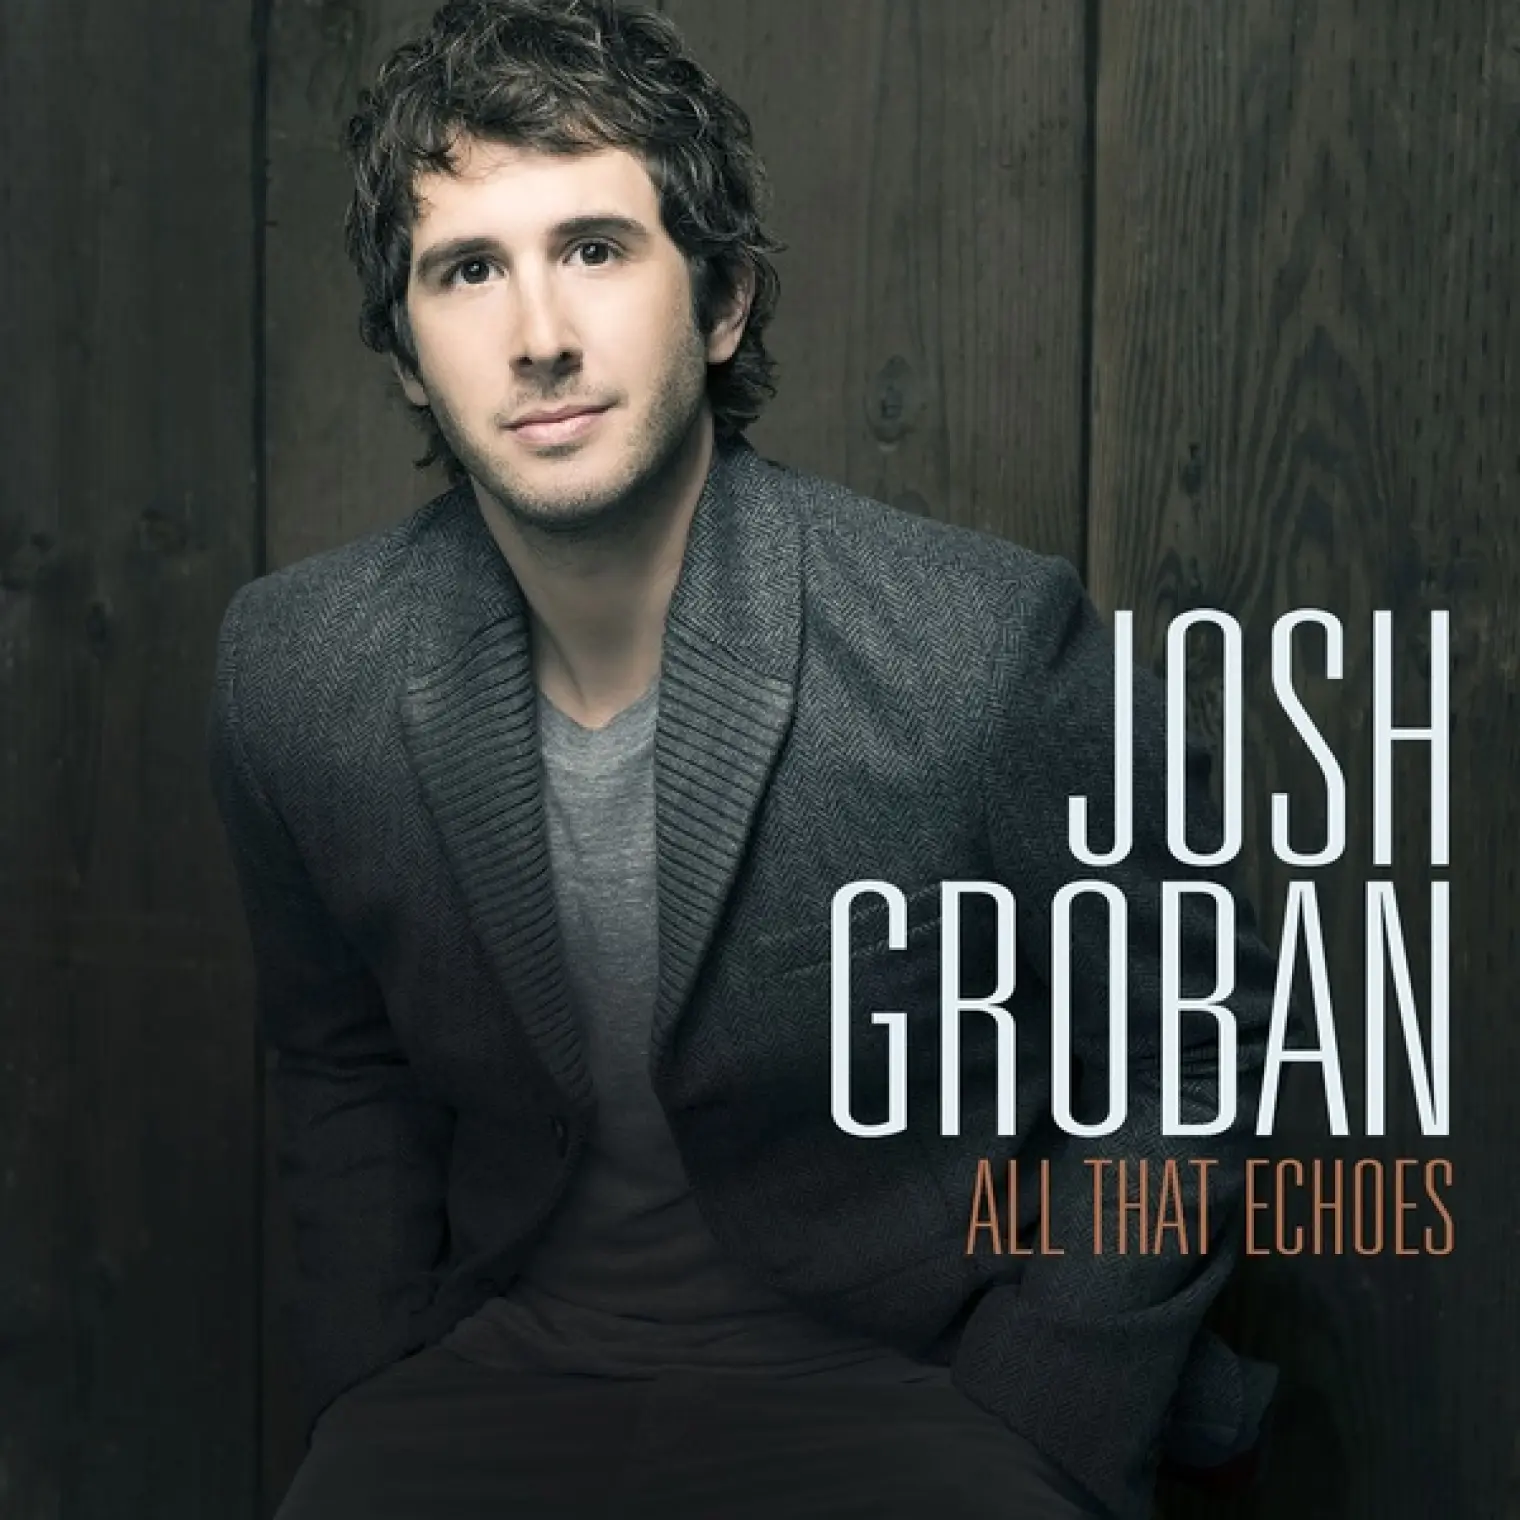 All That Echoes (Deluxe) -  Josh Groban 